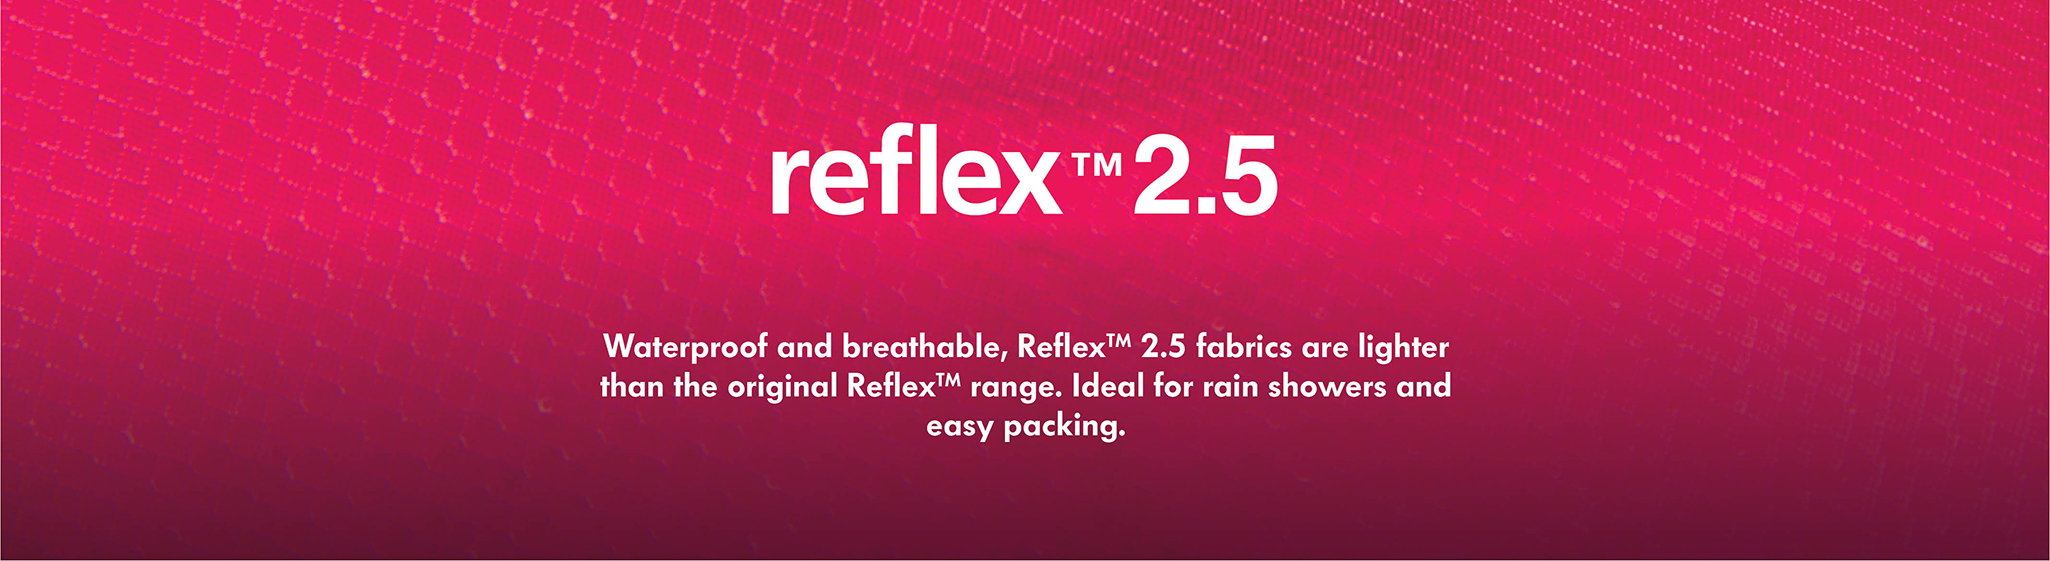 Reflex 2.5 Waterproof and breathable, Reflex 2.5 is a lighter and more packable version of our waterproof Reflex fabric - designed for short rain showers and easy packing